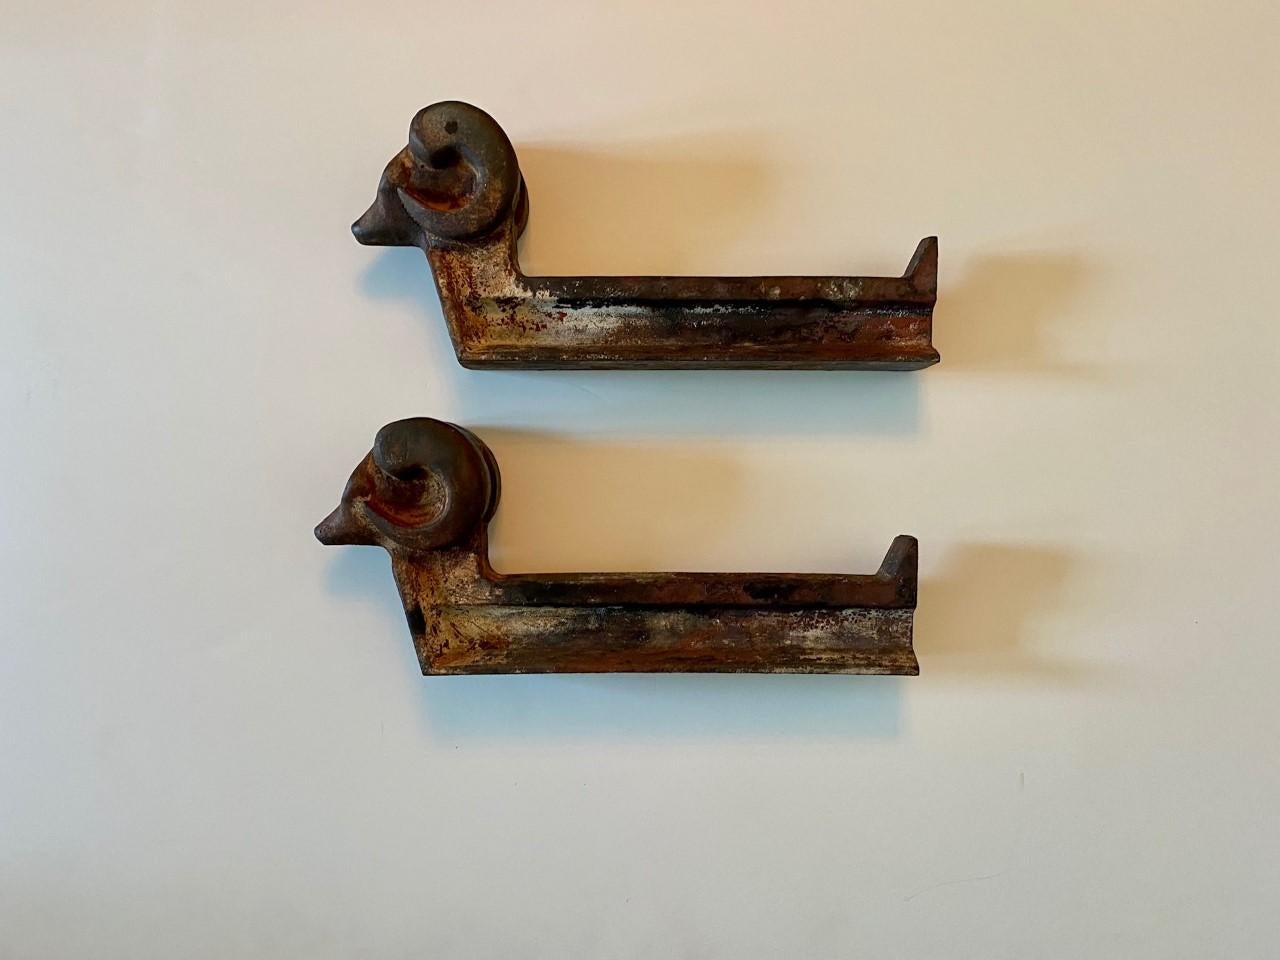 Incredible and bold 1930s examples of andirons. Ram’s head form created in iron marked “Olympic Log Master” on side. Powerful pieces.